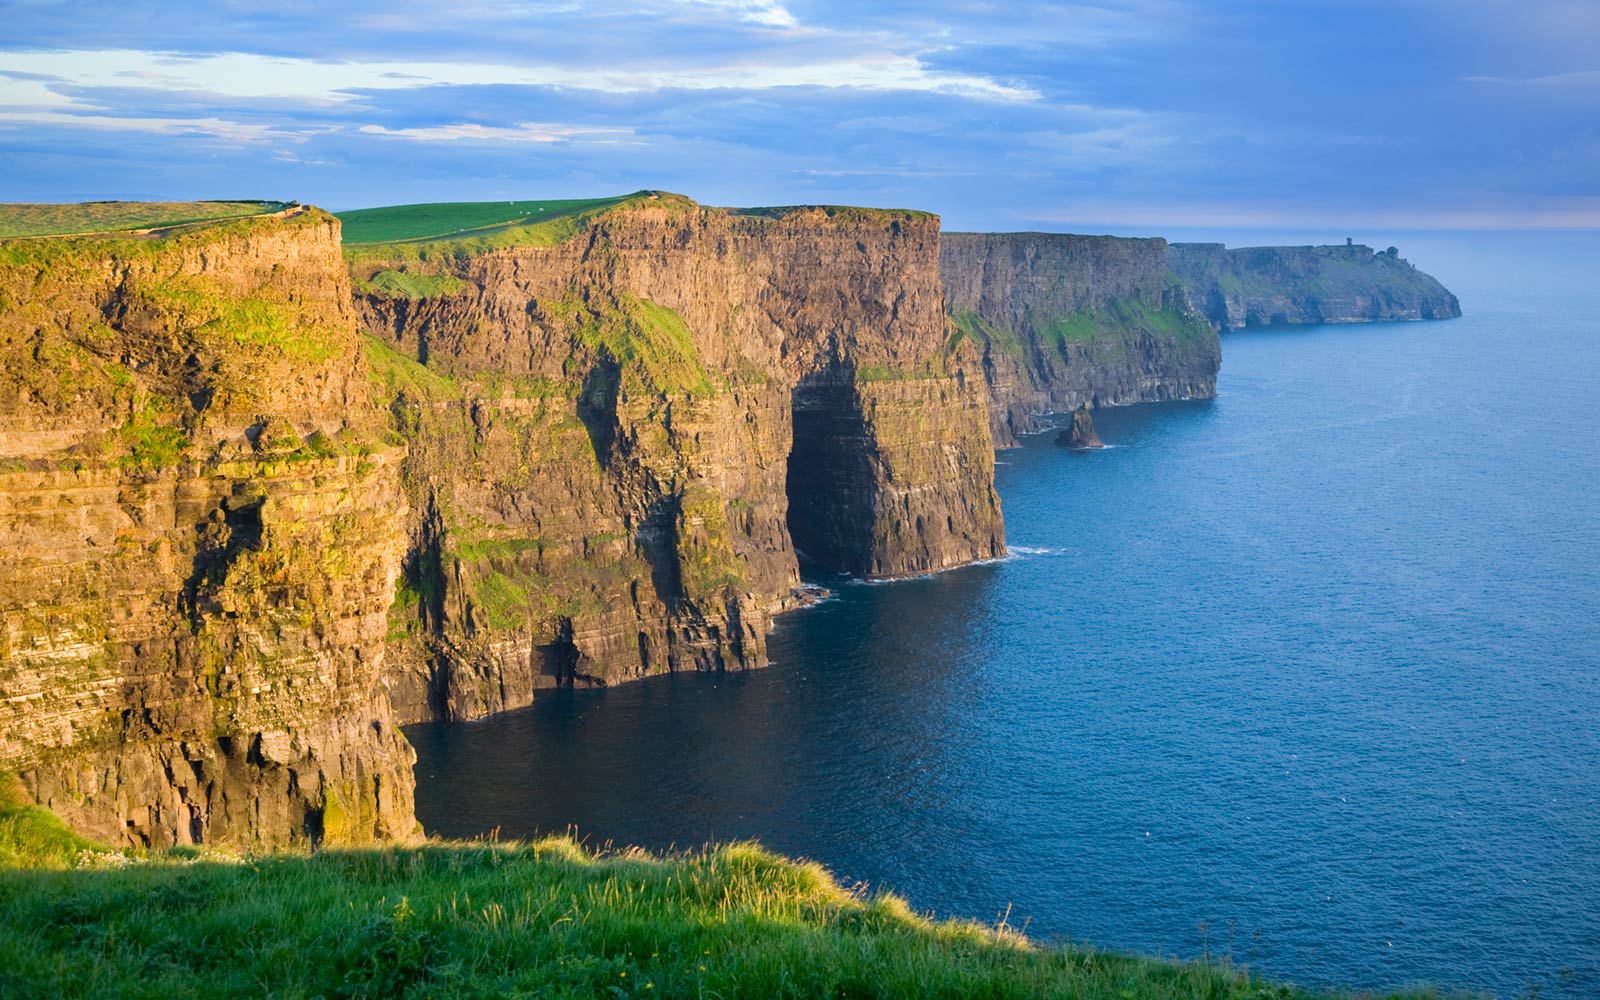 Why is Cliffs of Moher famous?